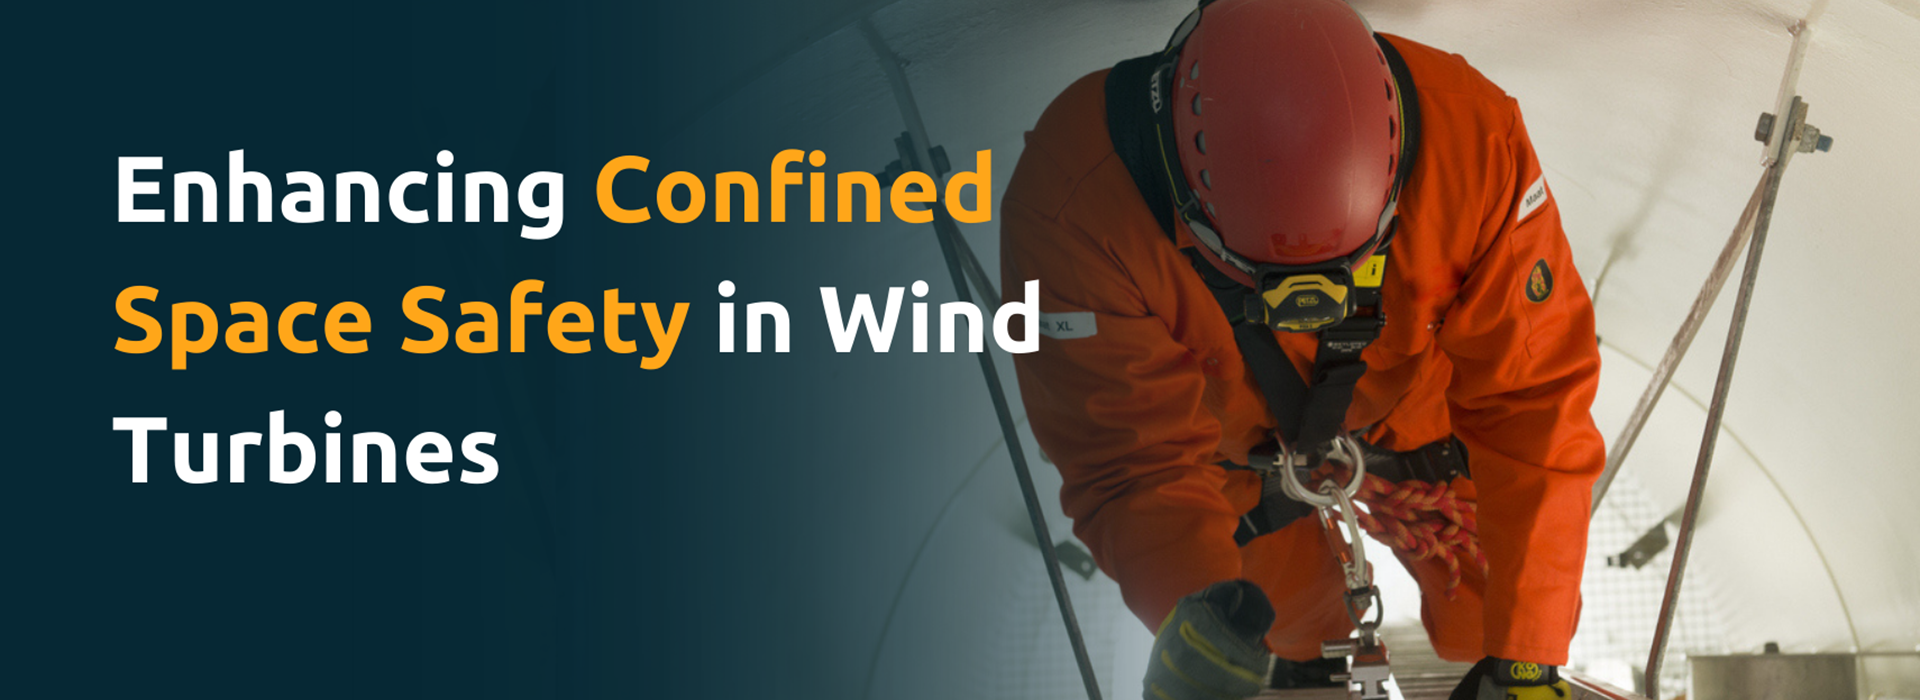 Enhancing Confined Space Safety In Wind Turbines Article Thumbnail (1)